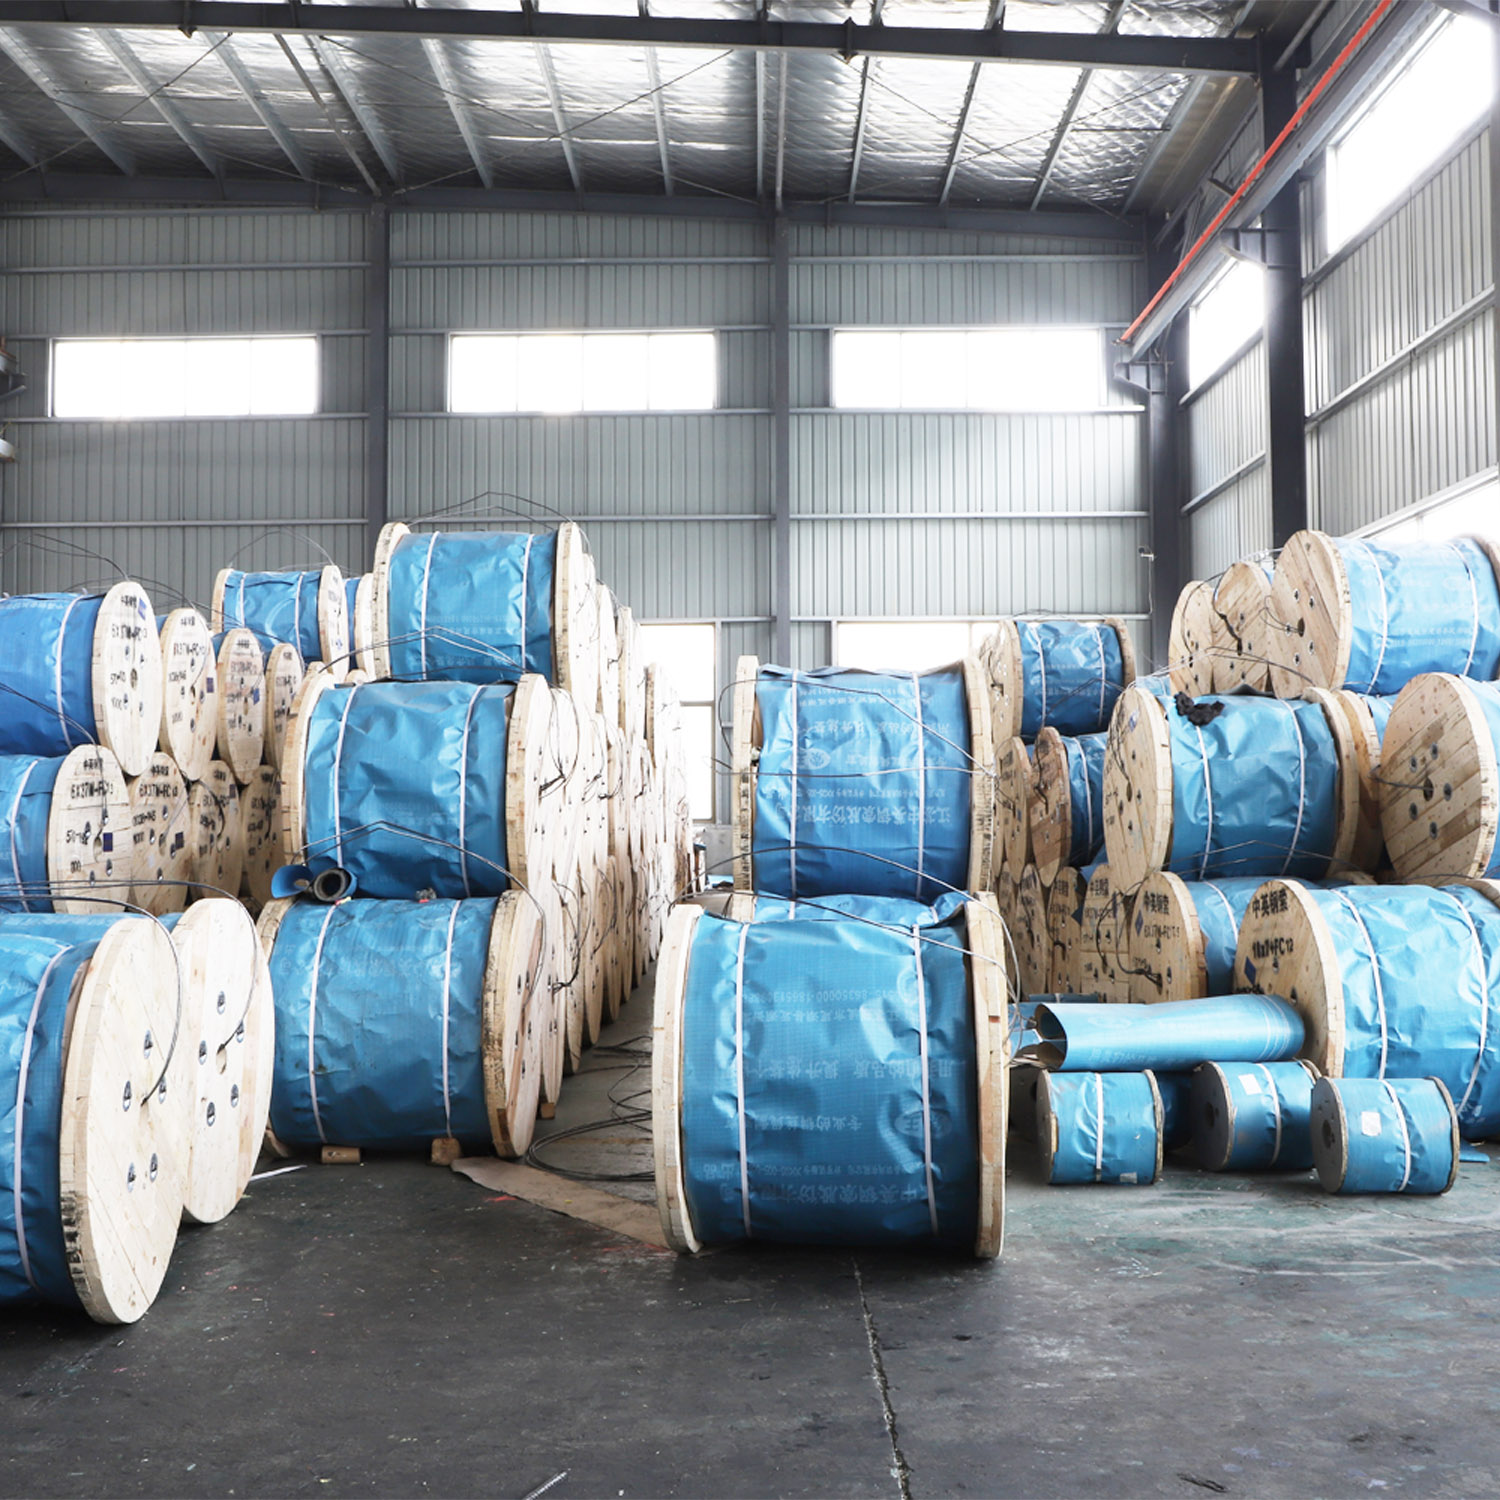 Tower Crane Wire Rope Ungalvanized Steel Cable 35wx7 Steel Rope